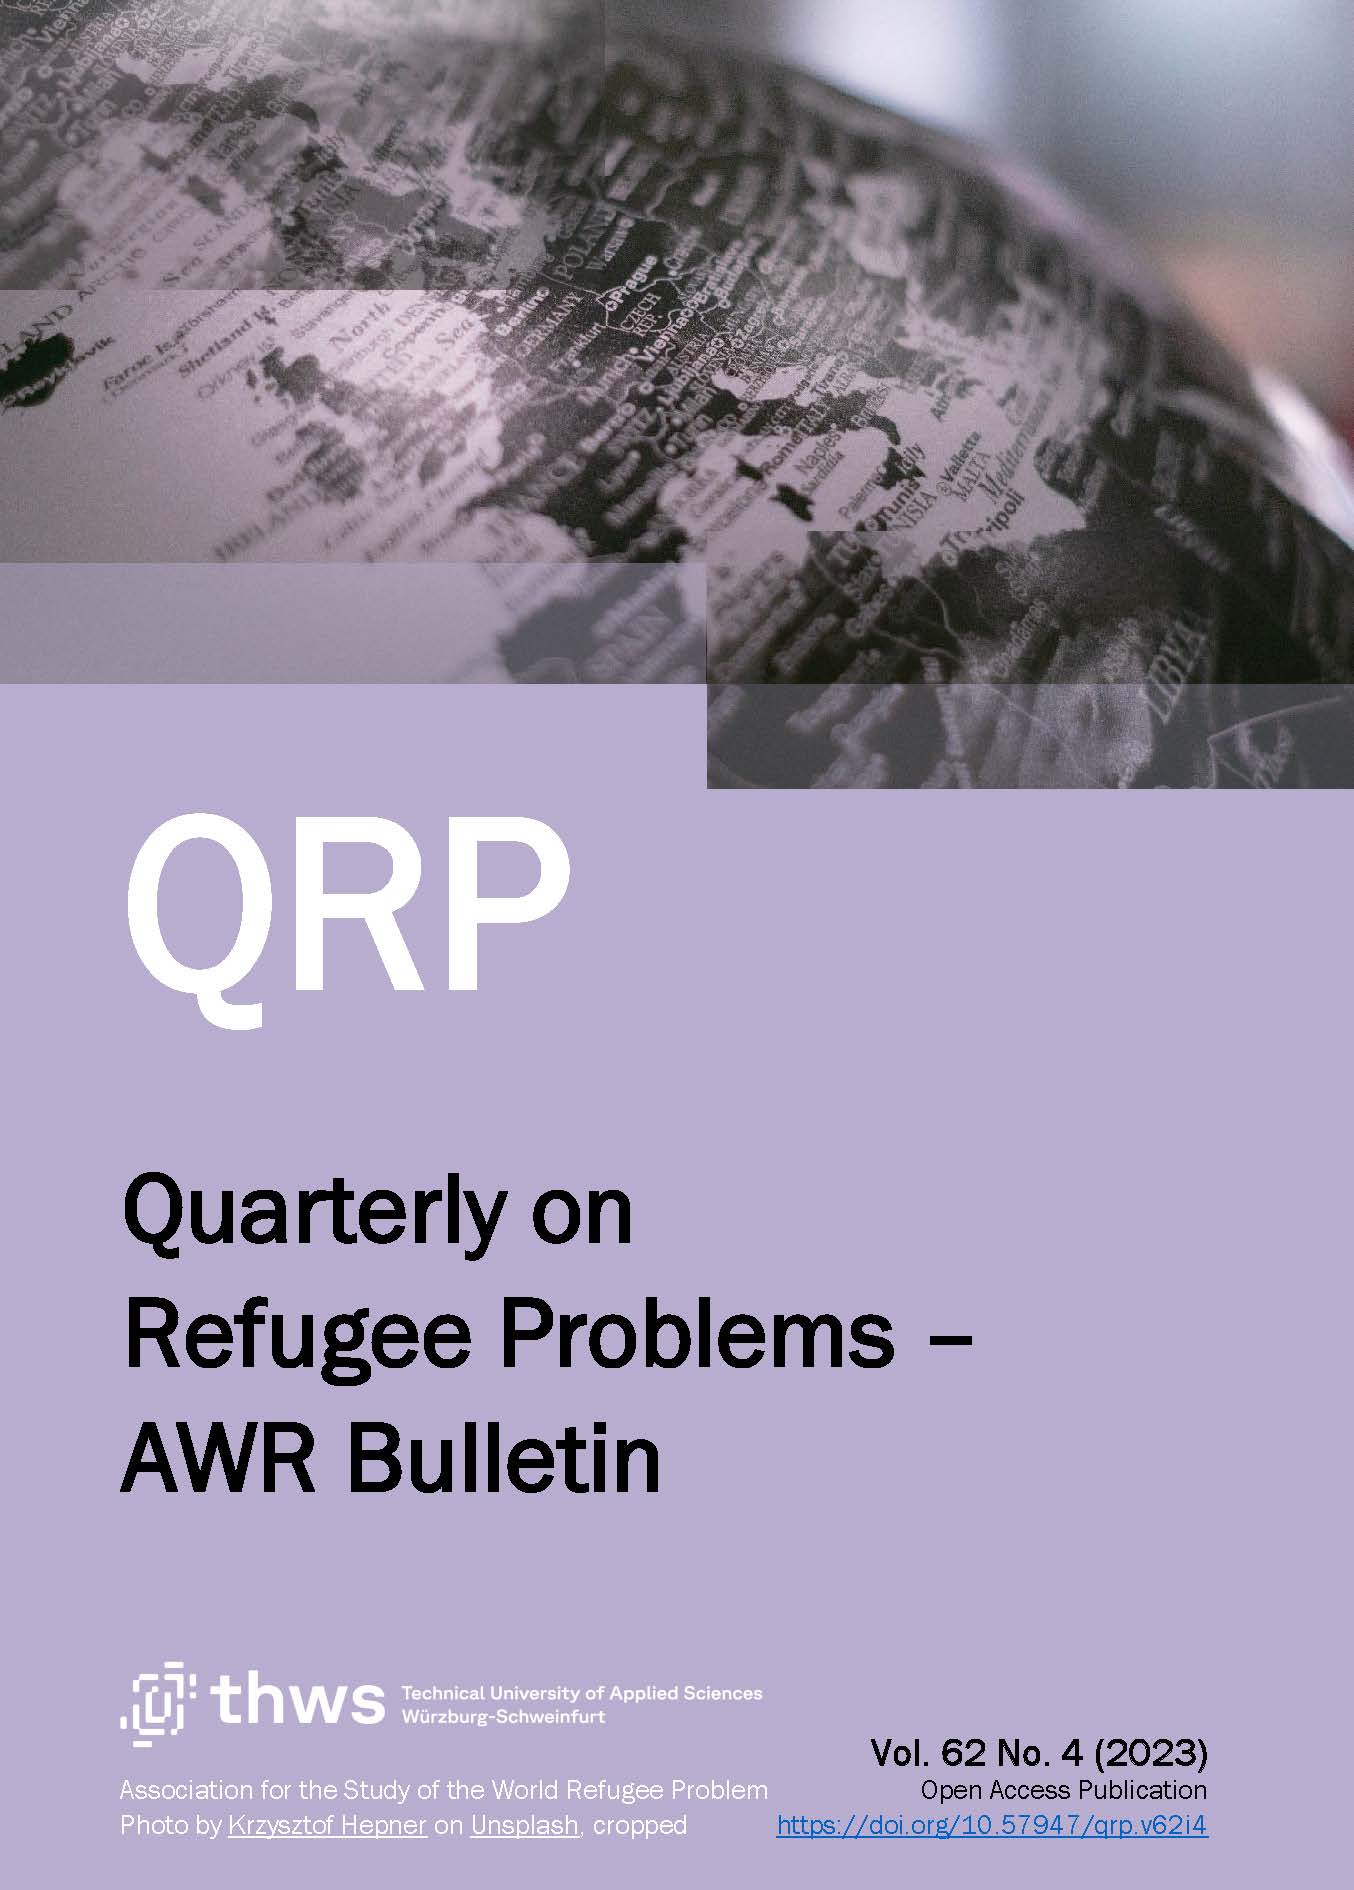 Cover of the Quarterly on Refugee Problems - AWR Bulletin, Volume 62, Number 4 of the year 2023